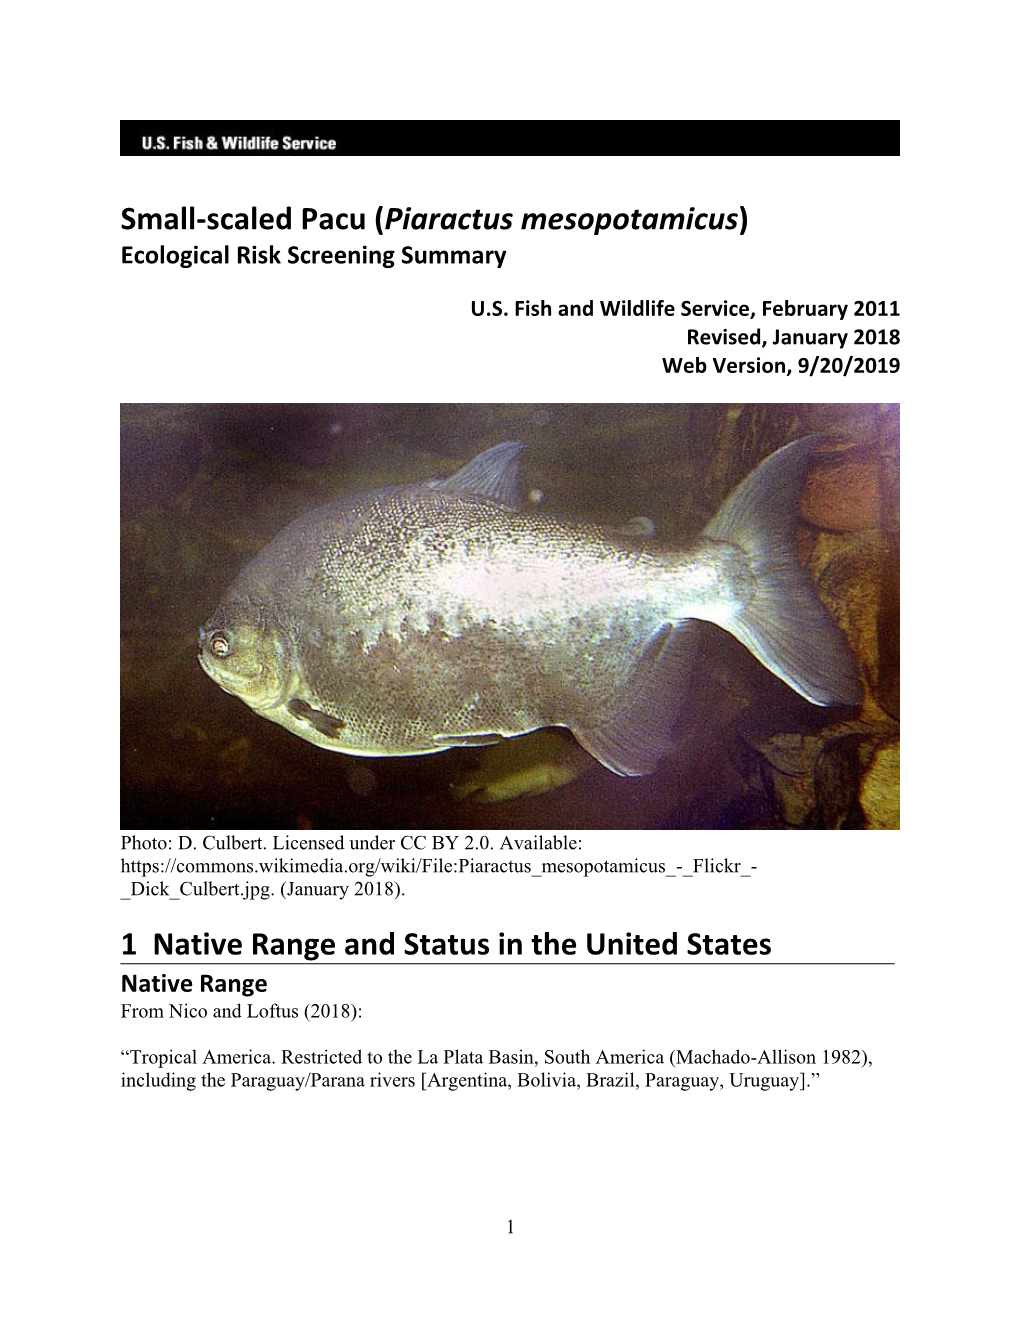 Small-Scaled Pacu (Piaractus Mesopotamicus) Ecological Risk Screening Summary